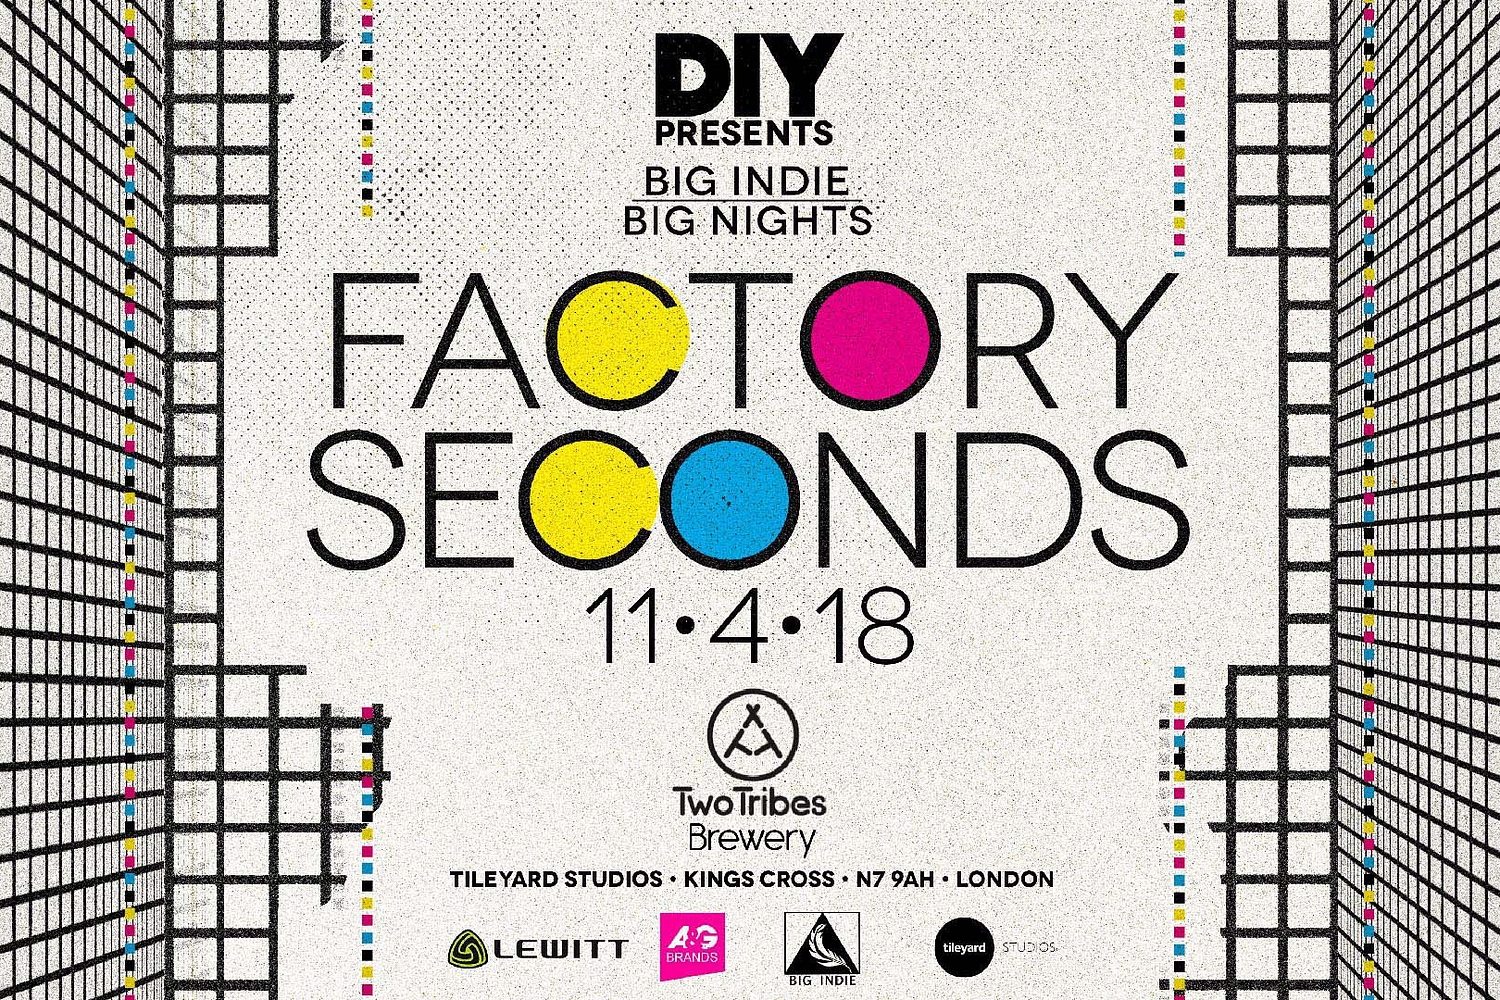 DIY are teaming up with Big Indie for a series of new band shows, starting with Factory Seconds!